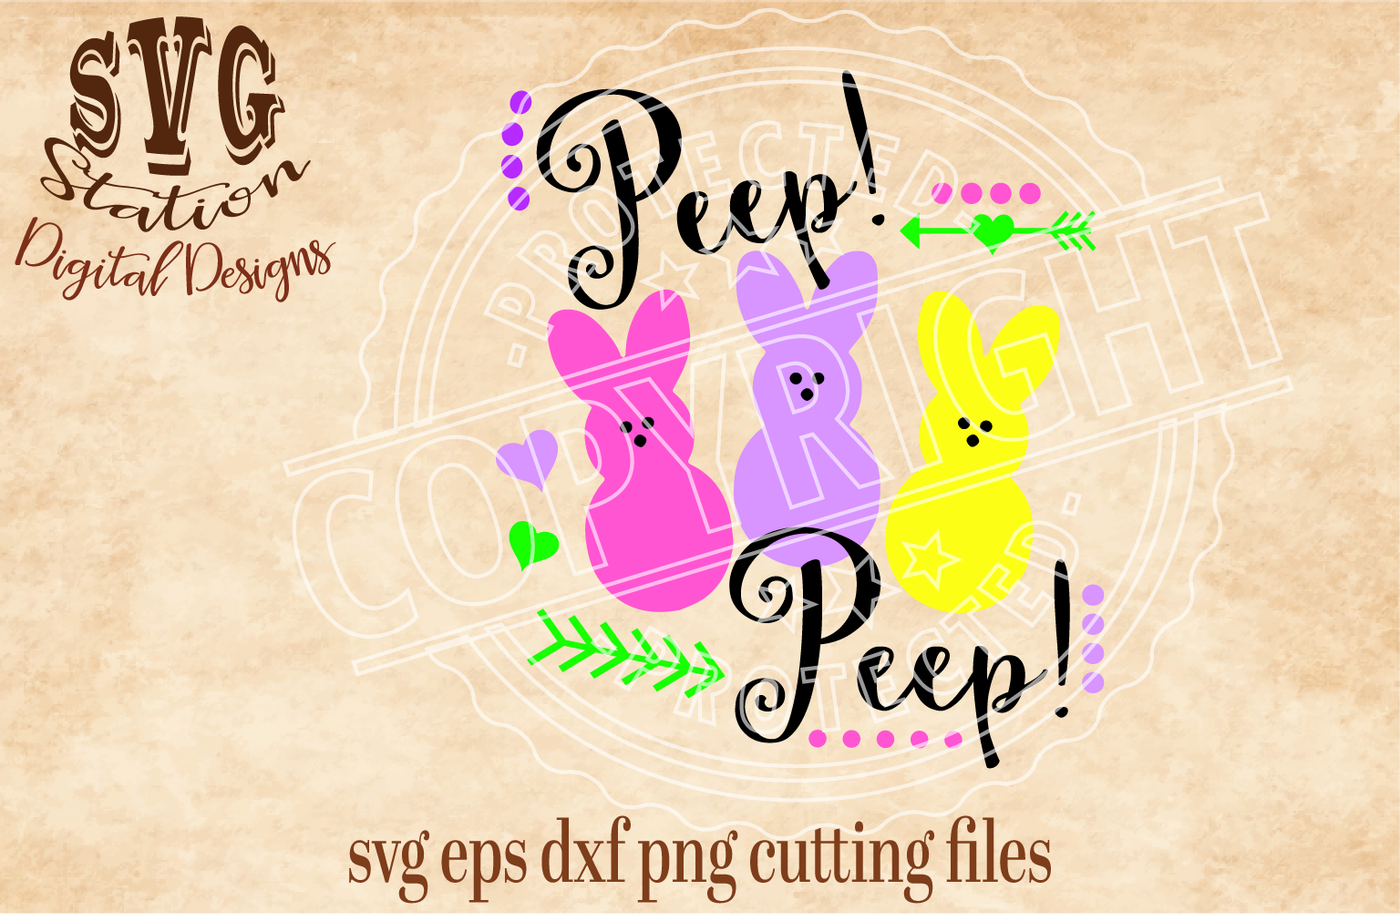 ori 54123 2cad3a186c14e3324ff6d121666234acc4d2a001 peep peep easter svg dxf png eps cutting file silhouette cricut